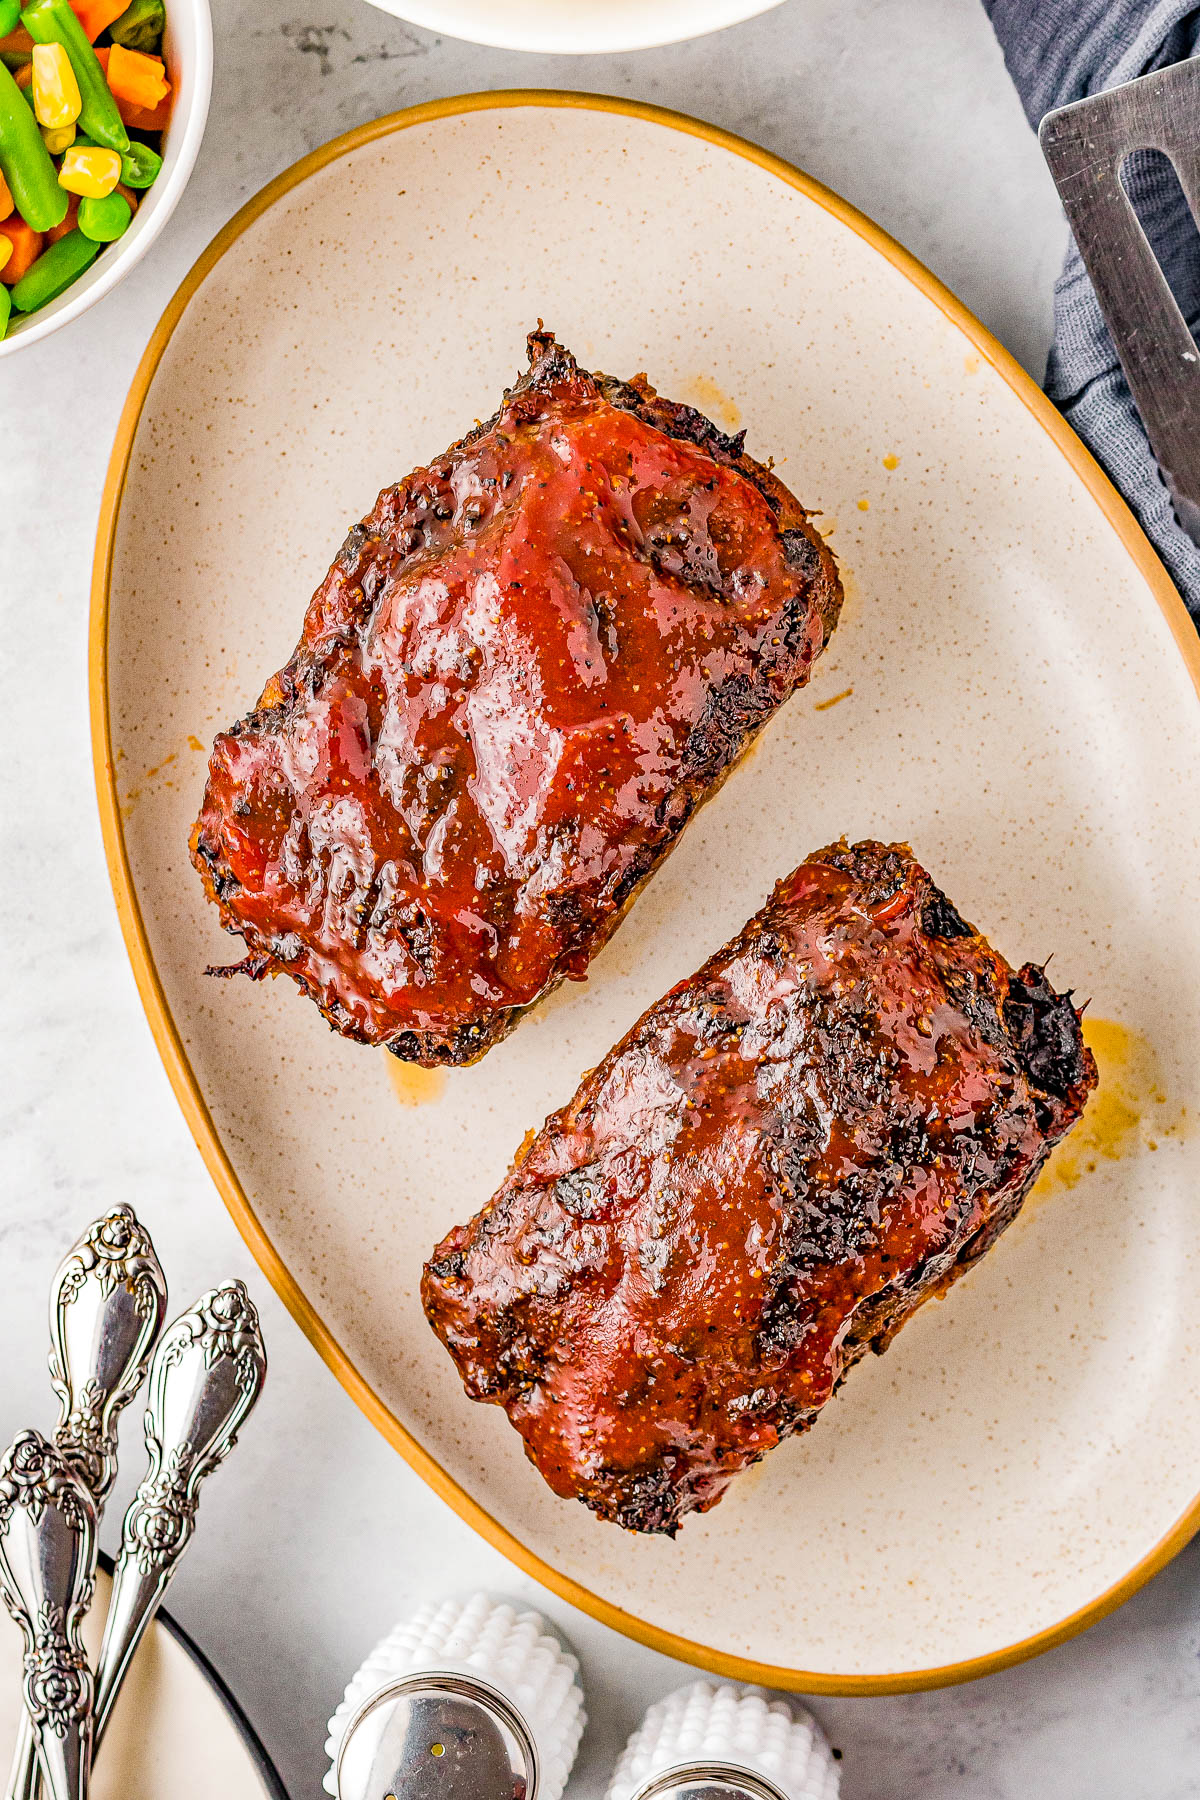 Cracker Barrel Meatloaf - This Cracker Barrel meatloaf copycat is tender, juicy, made with the restaurant's secret ingredients, glazed to tangy-sweet perfection, and sure to become a family FAVORITE comfort food dinner recipe! Air fryer AND oven baking options provided.